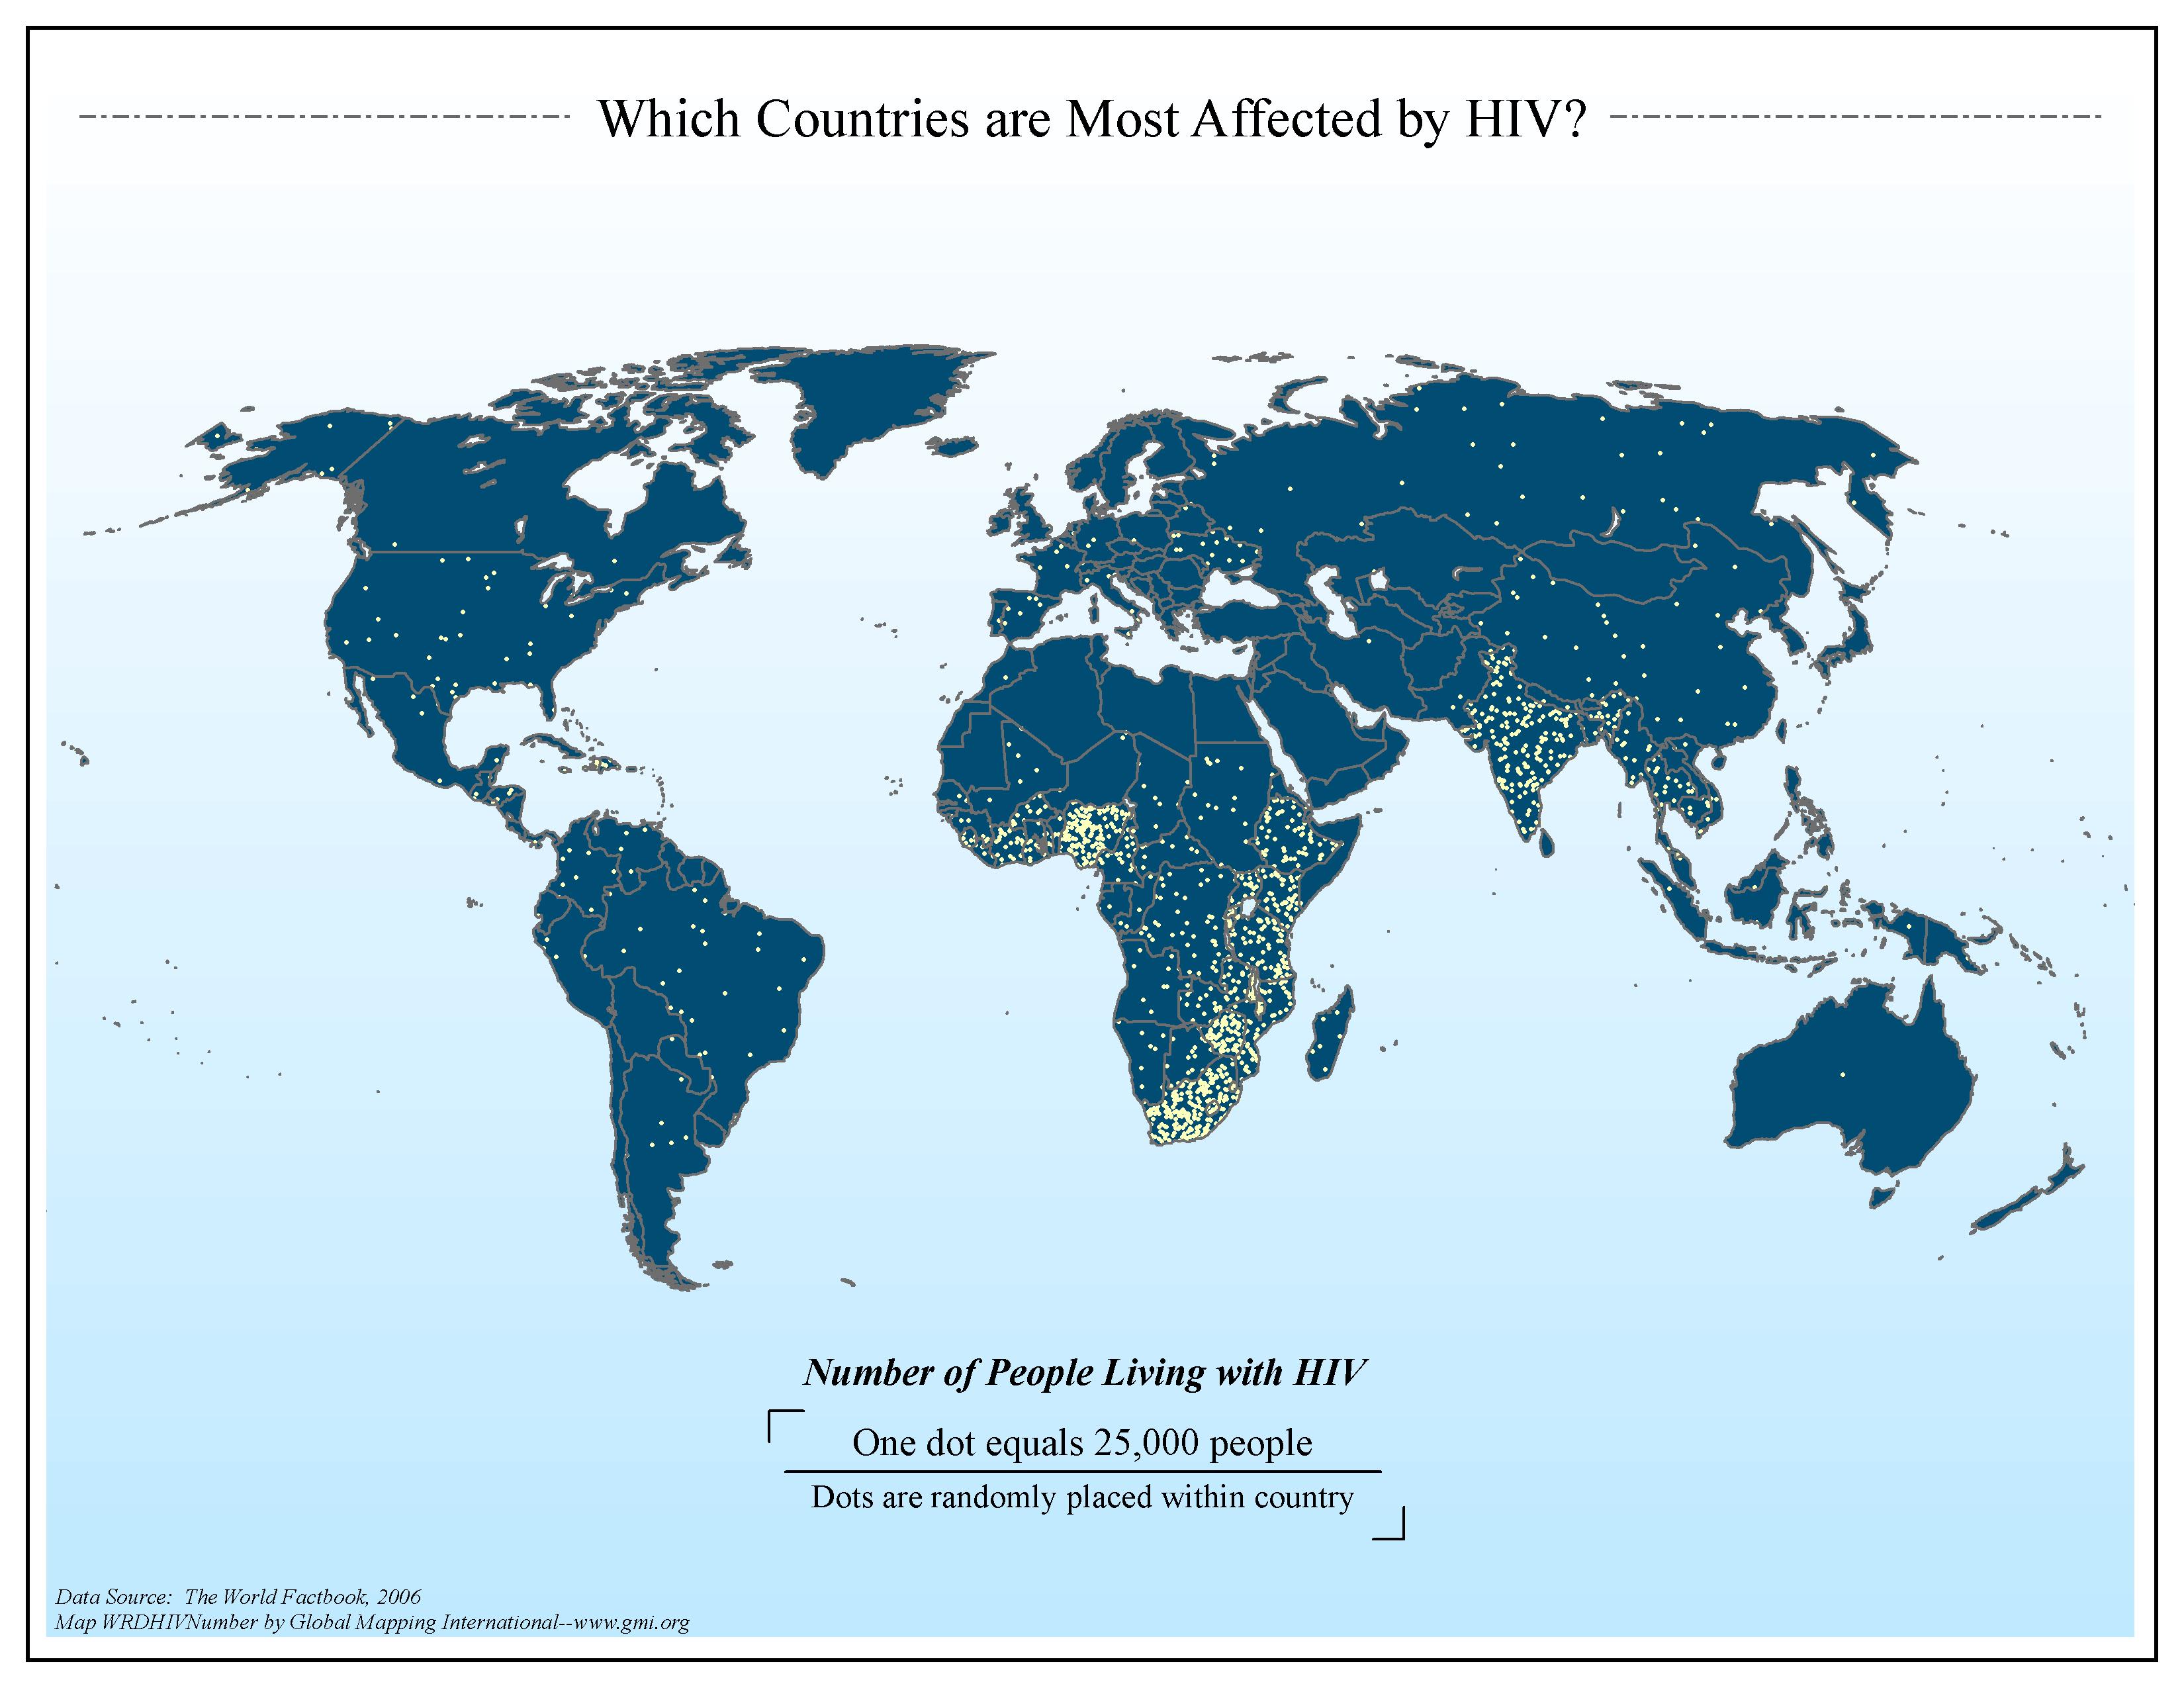 Which Countries are Most Affected by HIV?